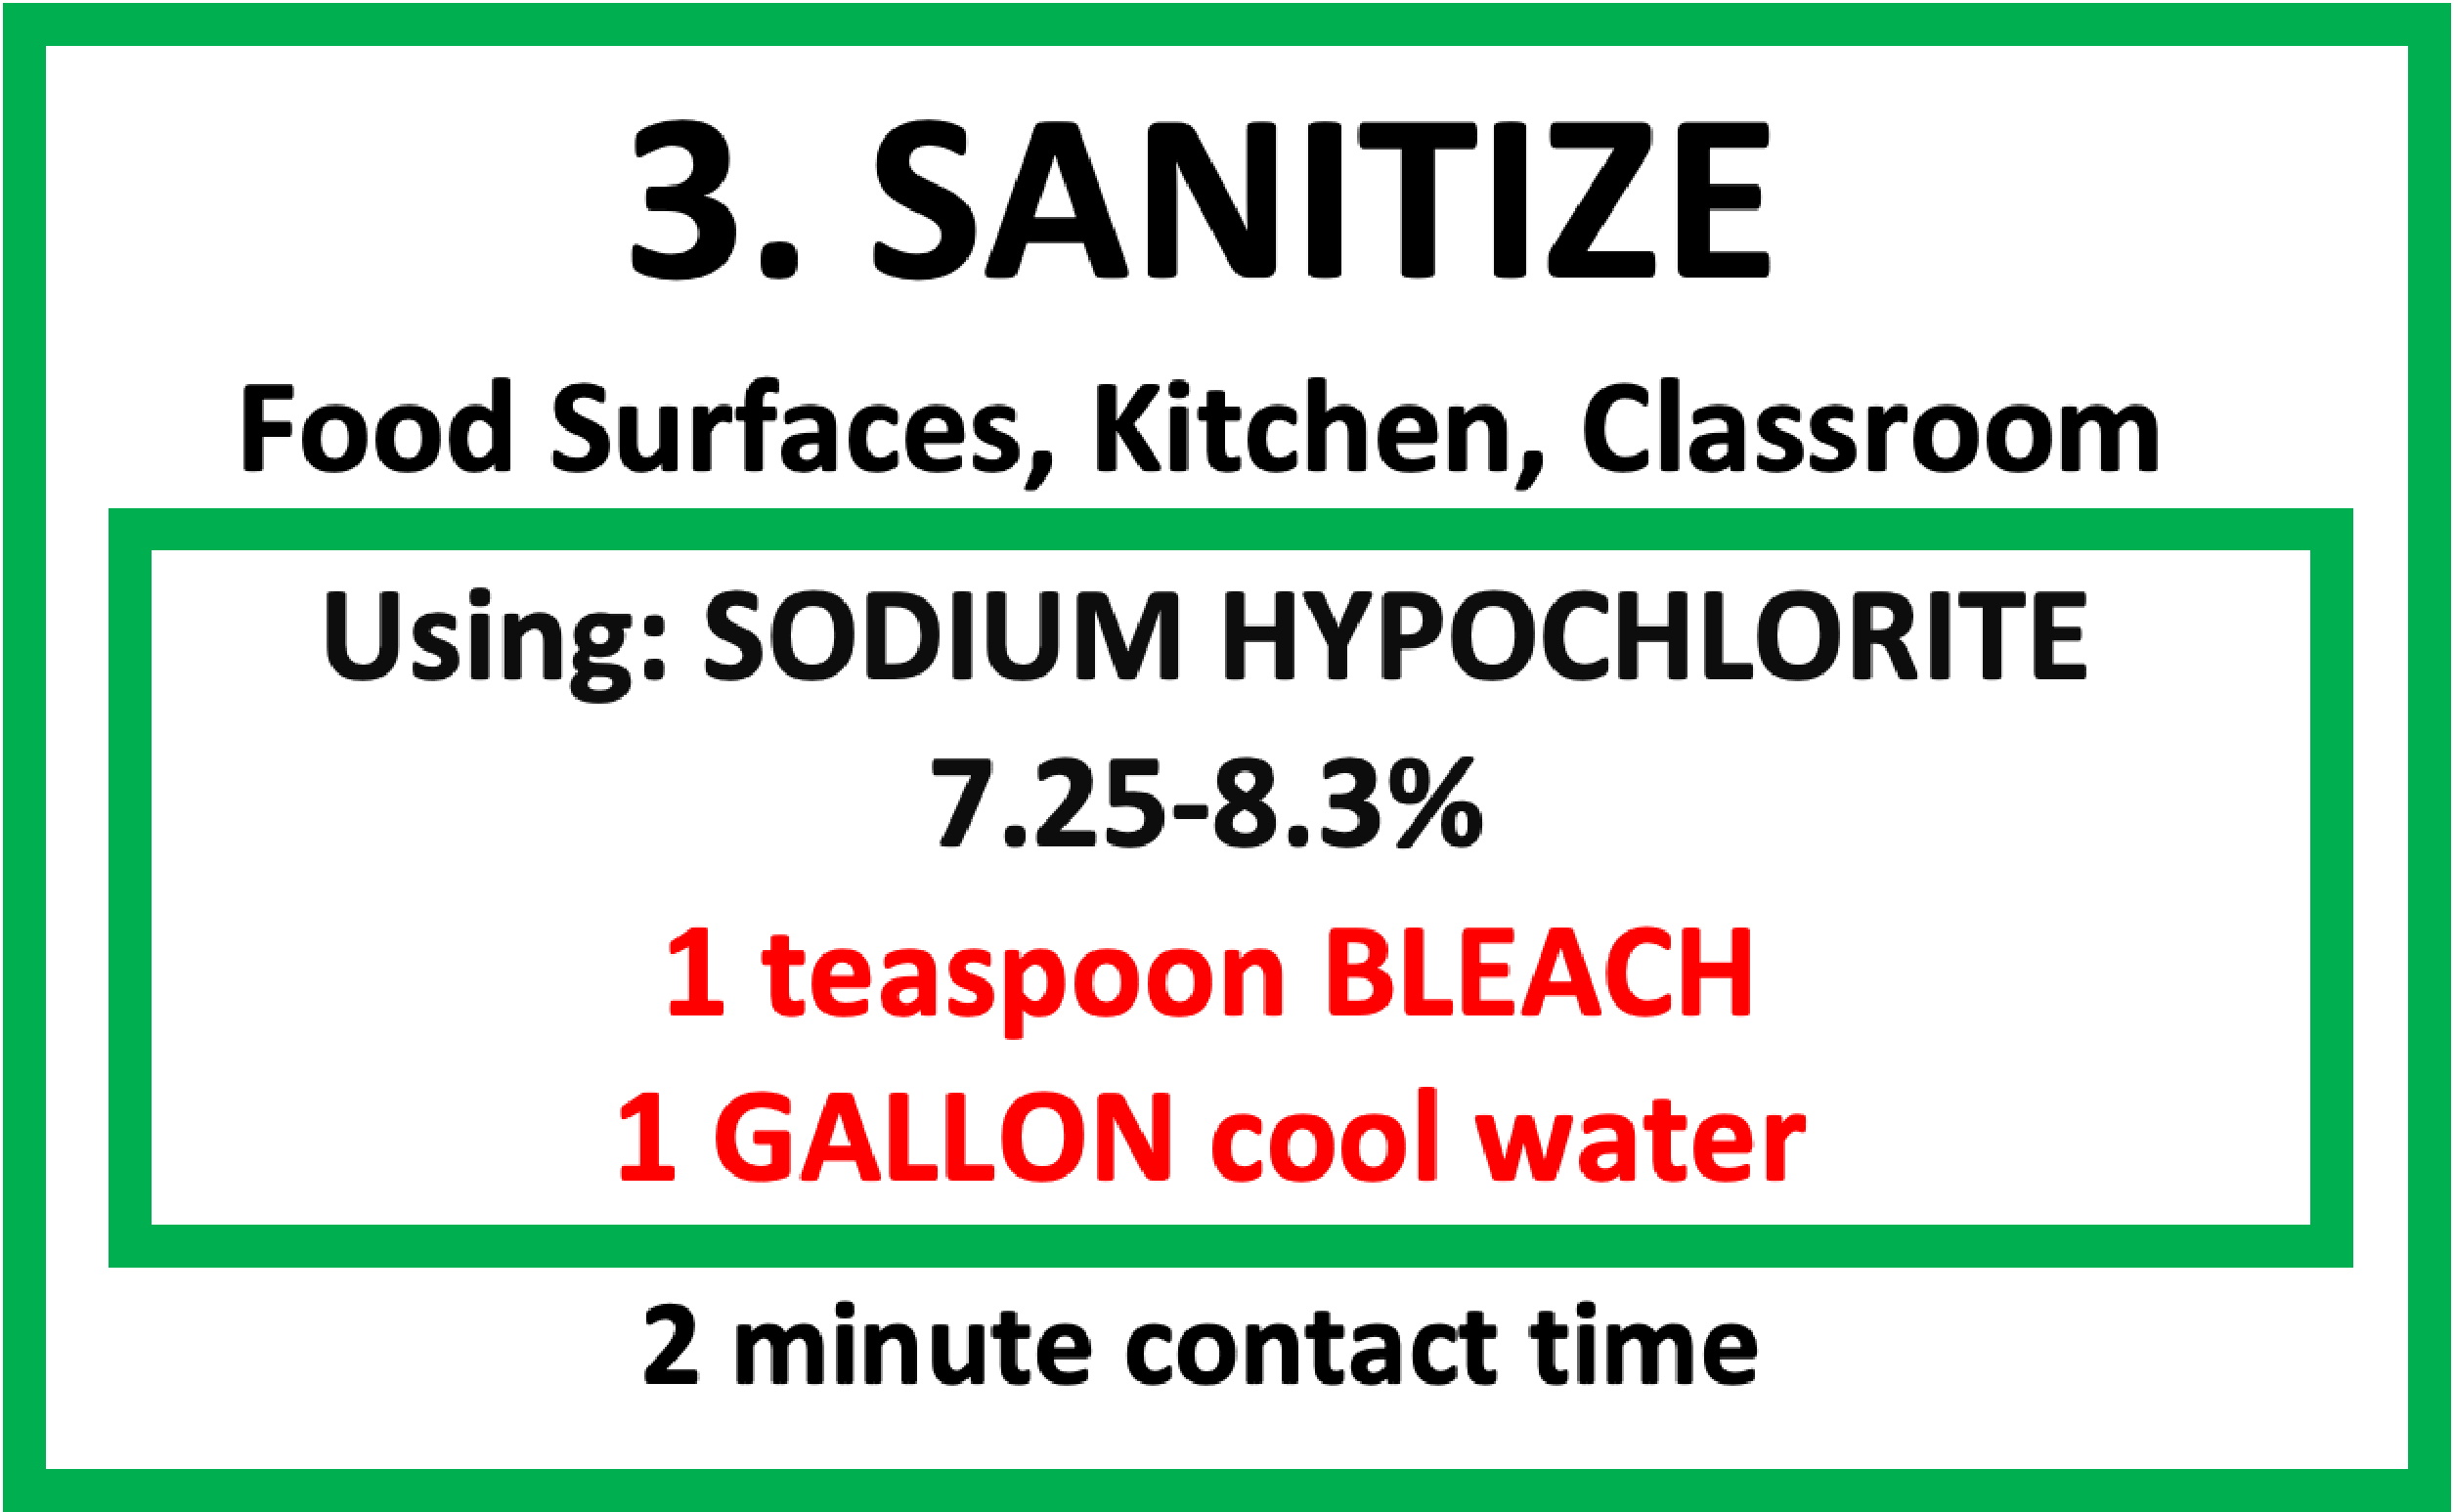 Sample of a sanitize label for 1 gallon of solution